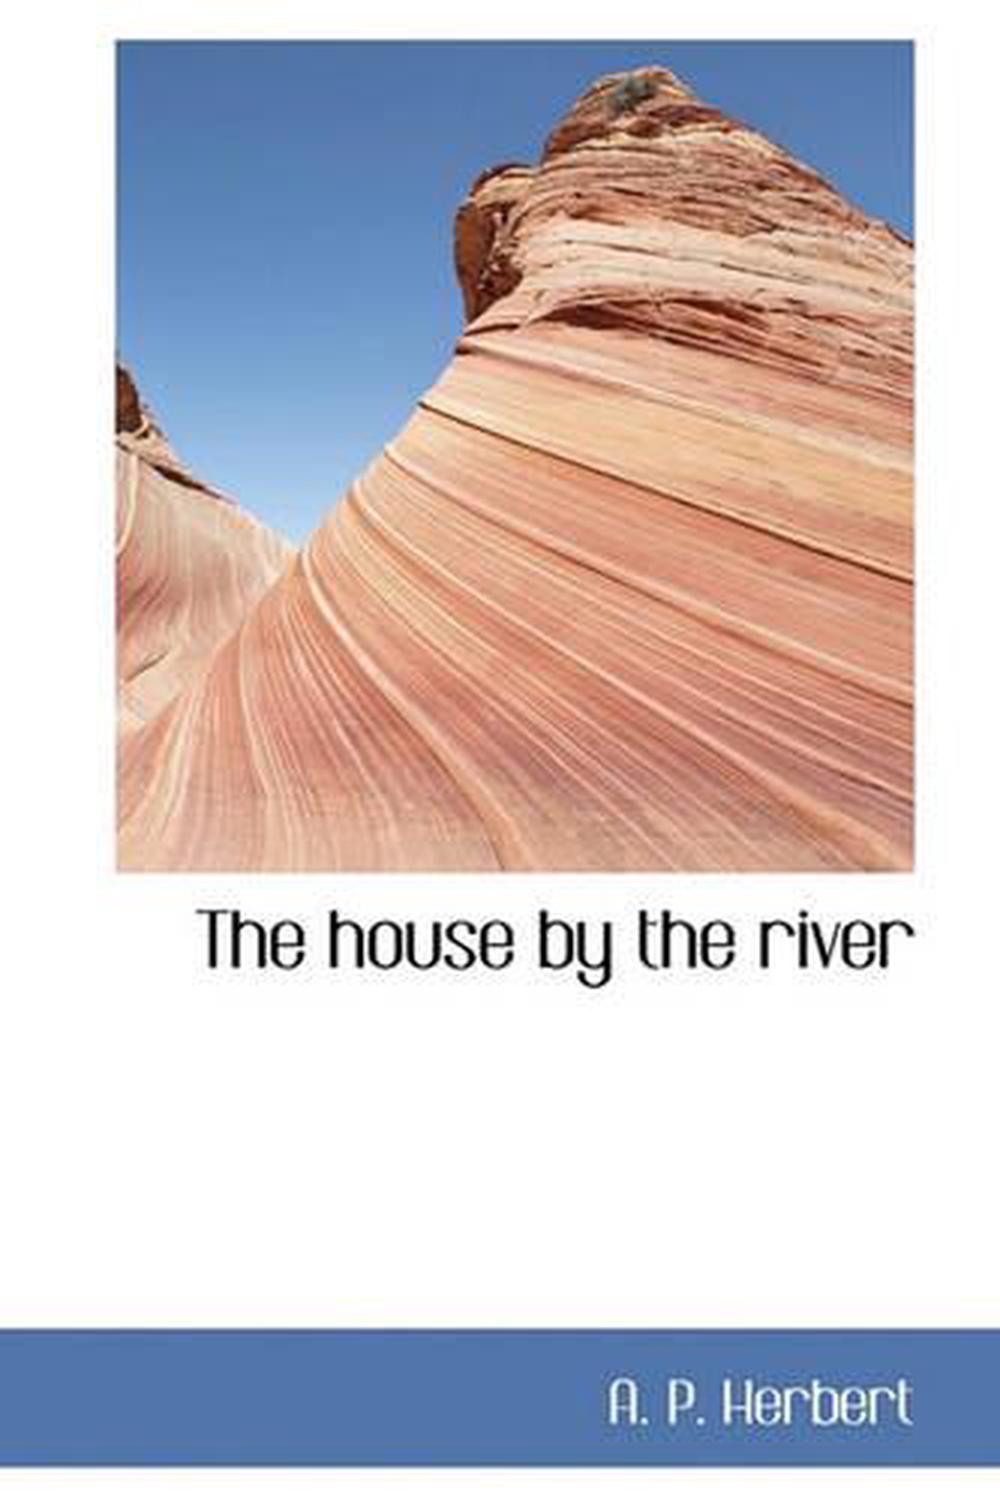 the house by the river essay